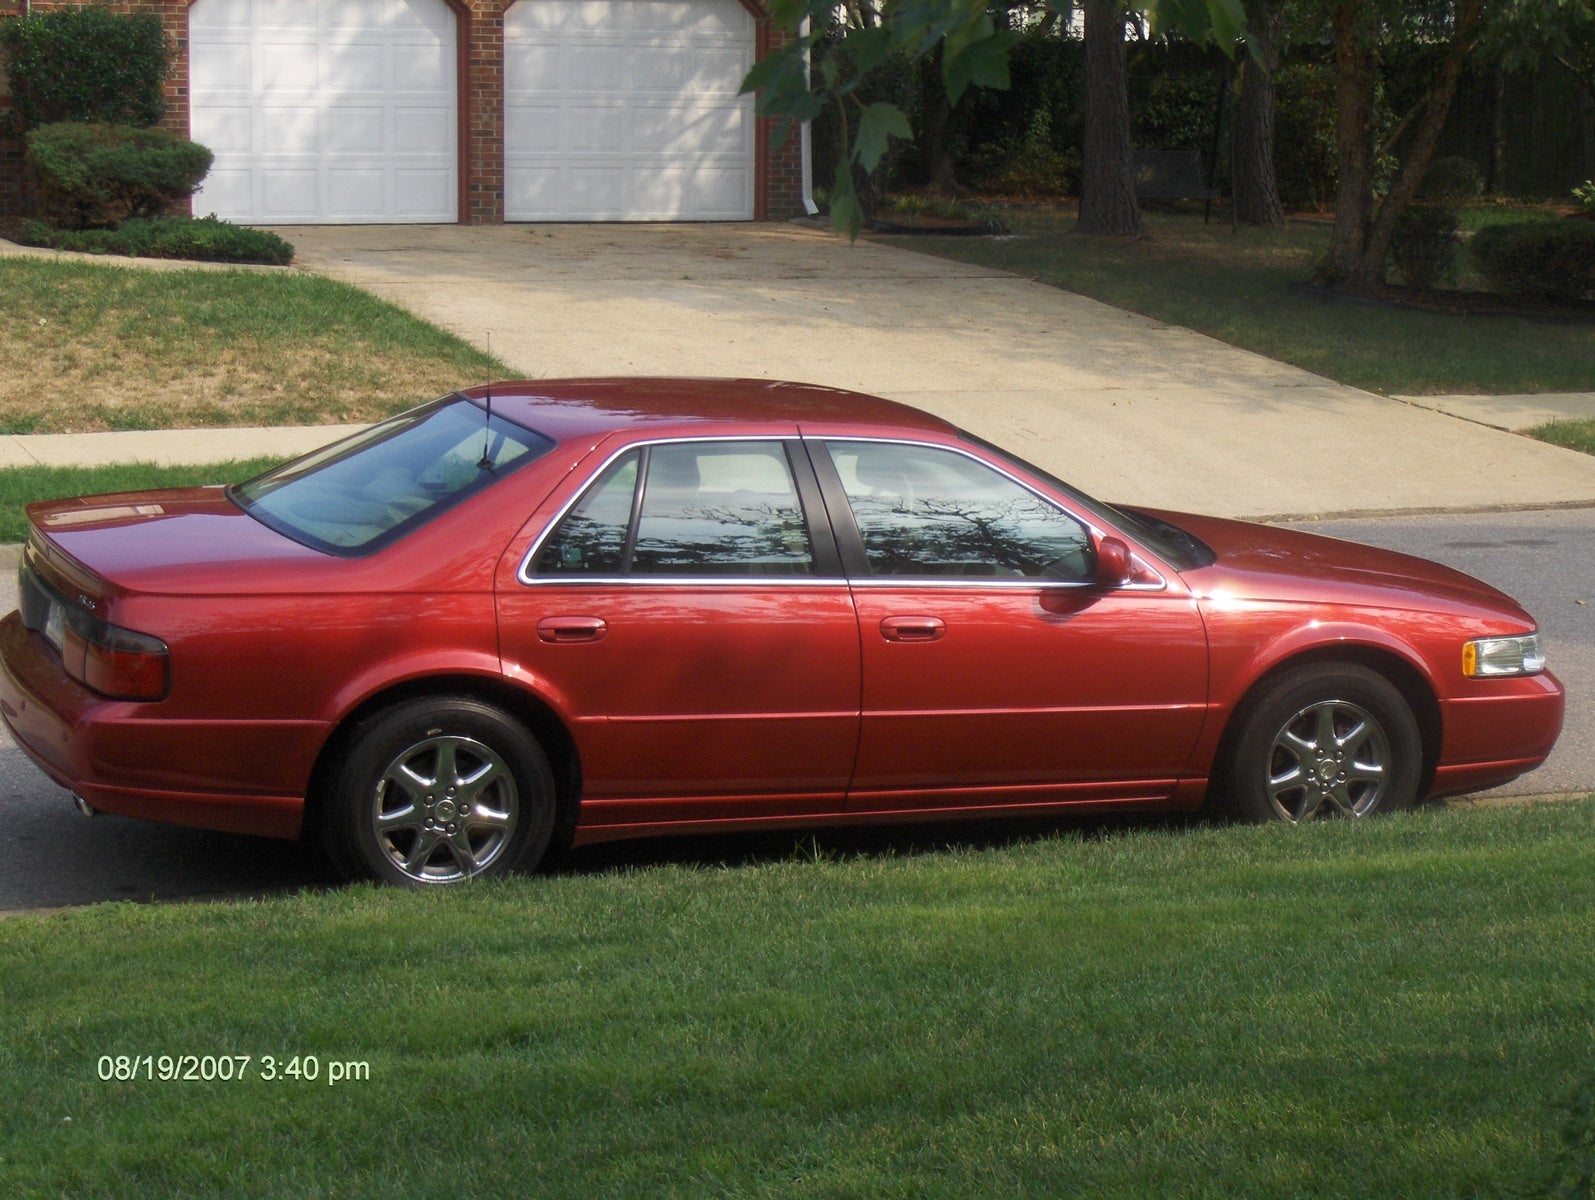 2002 Cadillac Seville - Pictures - 2002 Cadillac Seville STS pict ...